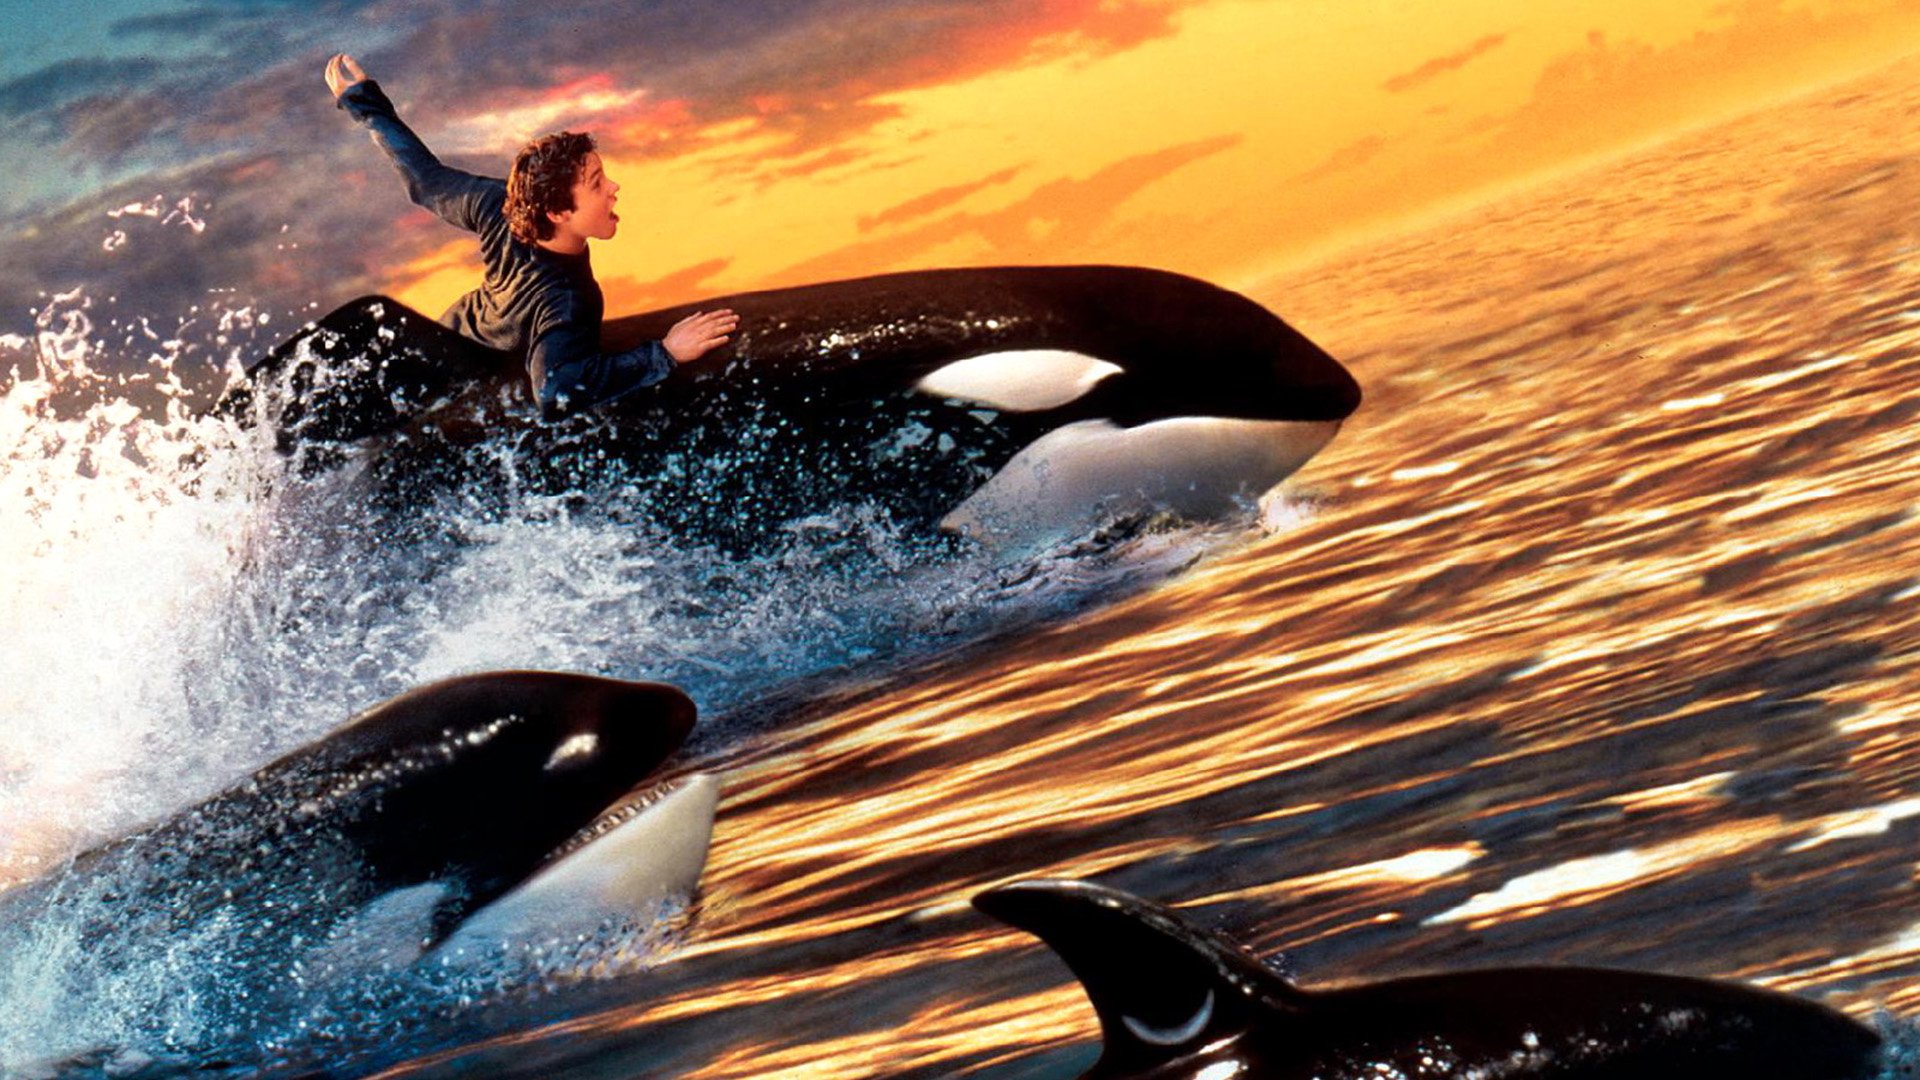 watch free willy 2 full movie